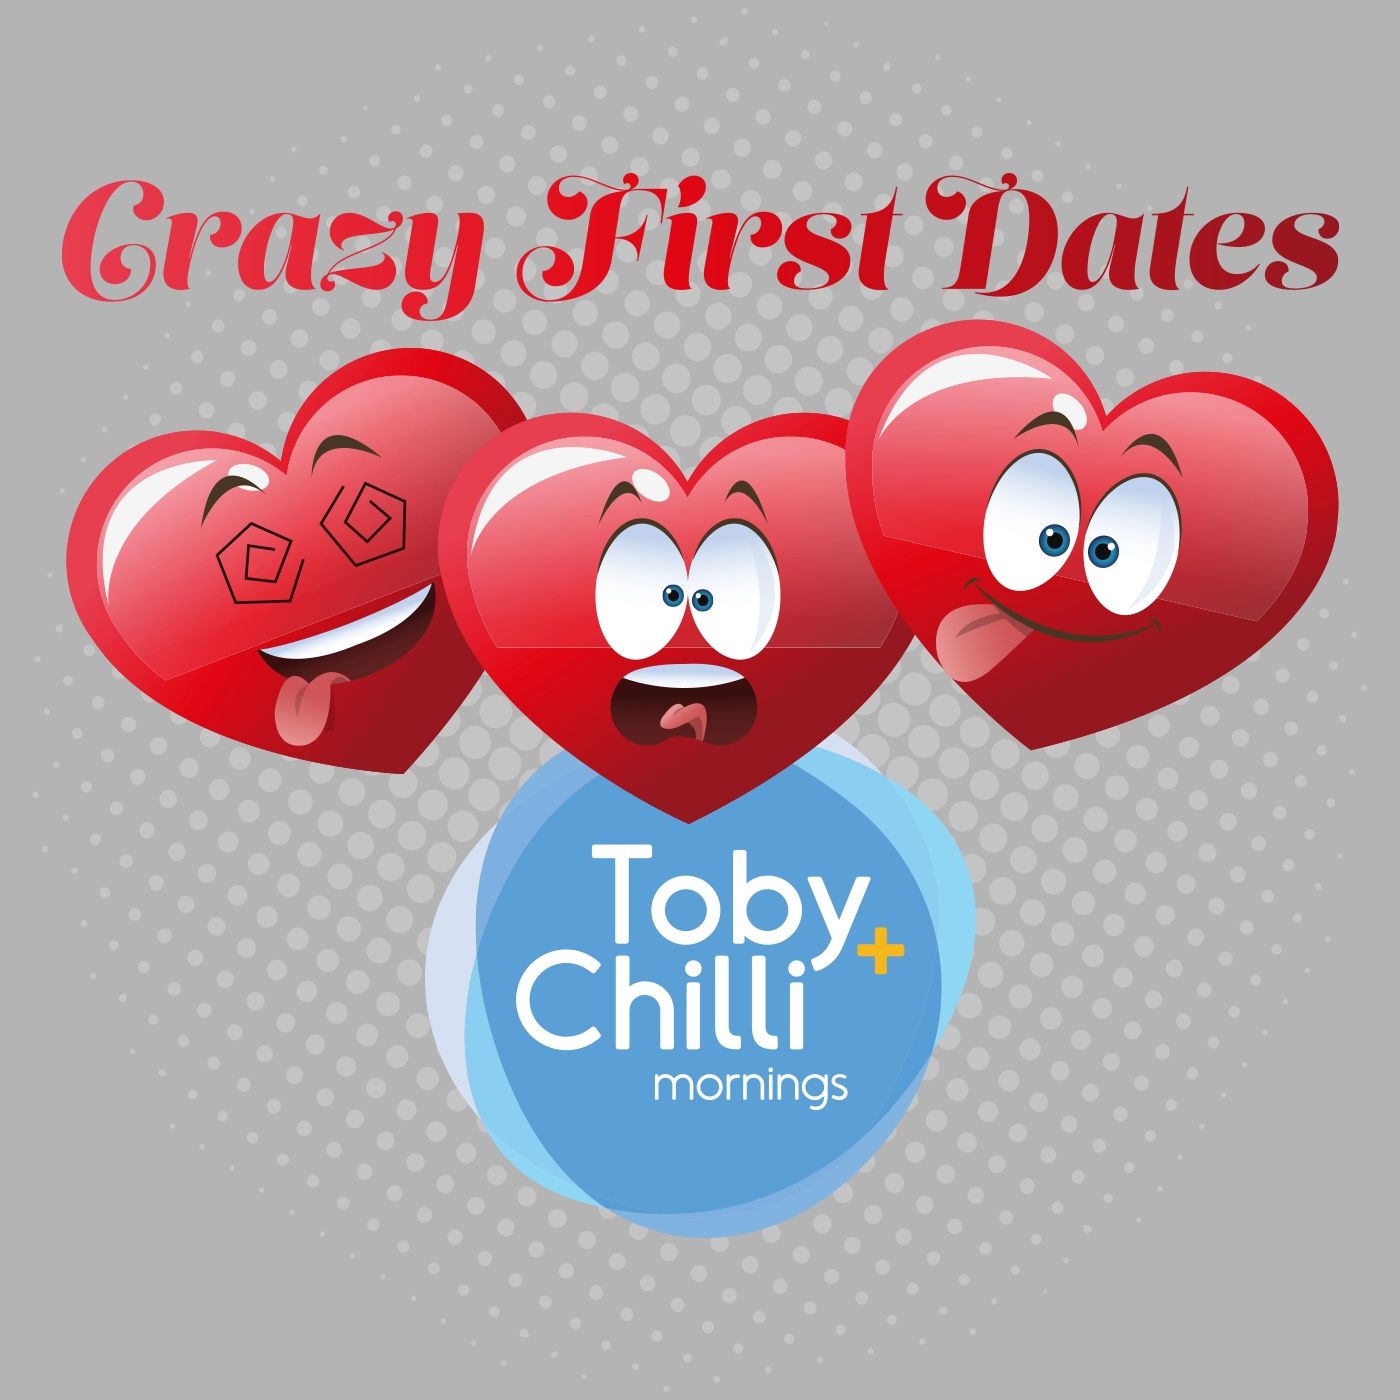 Toby + Chilli’s “Crazy First Dates”